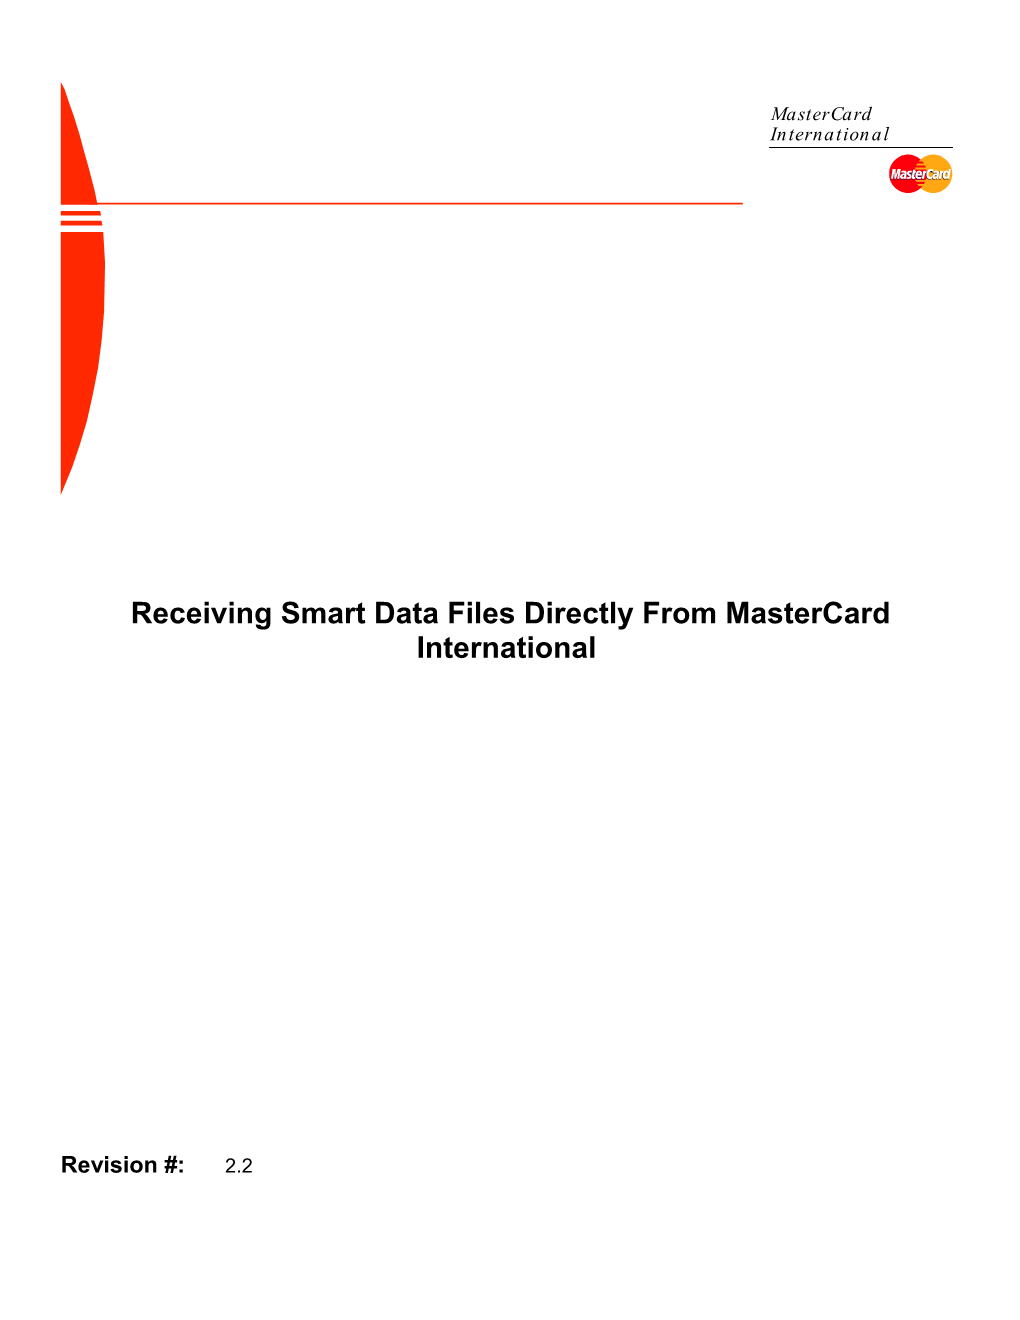 Receiving Files from Mastercard